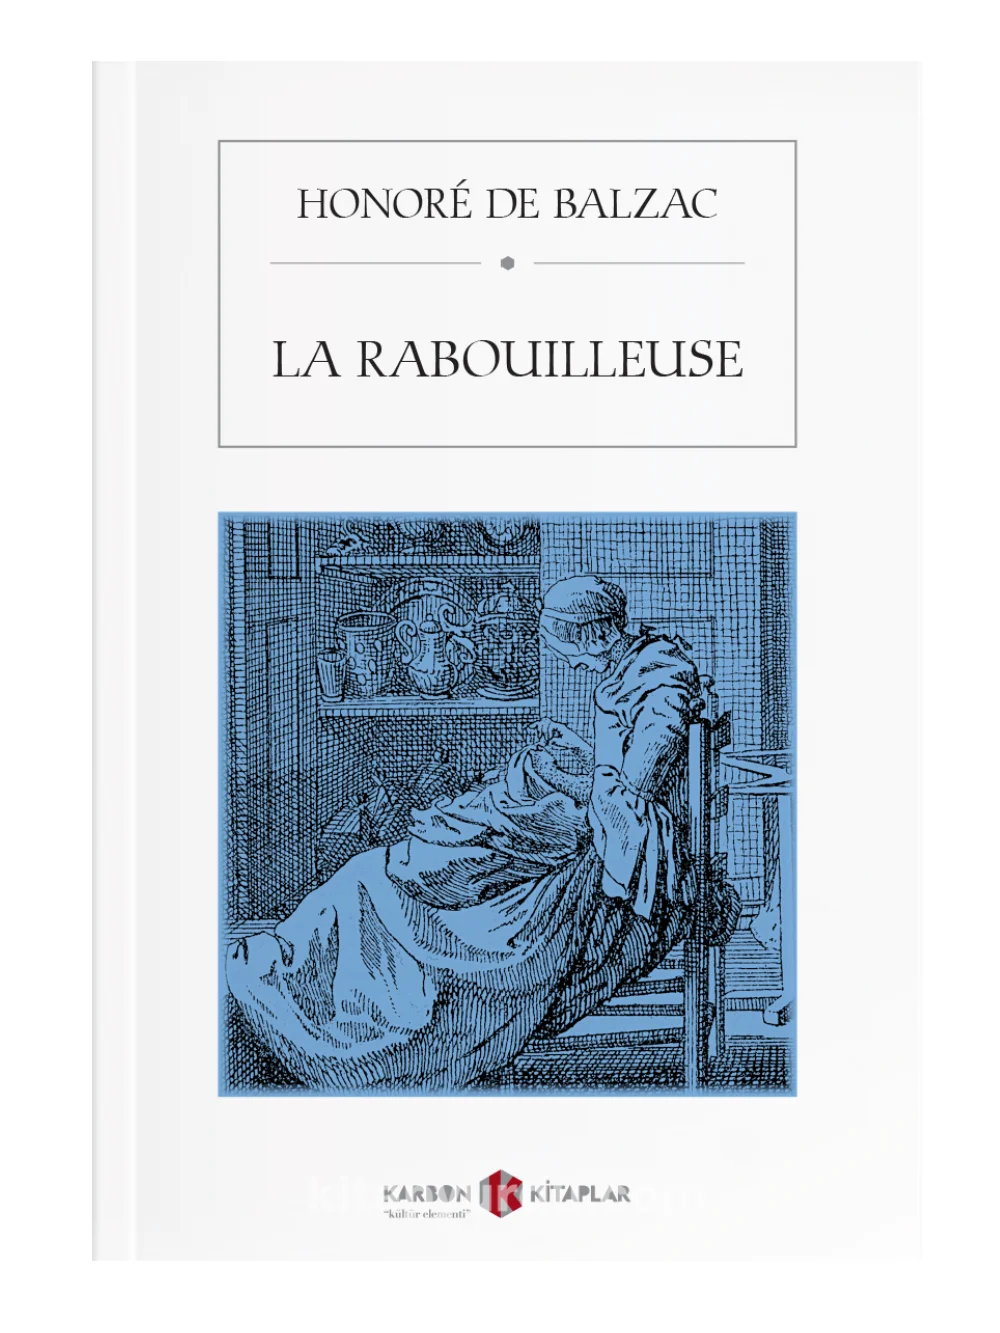 

The dresser - Honore de Balzac - French book - The best classics of world literature - Nice gift for friends and French learners